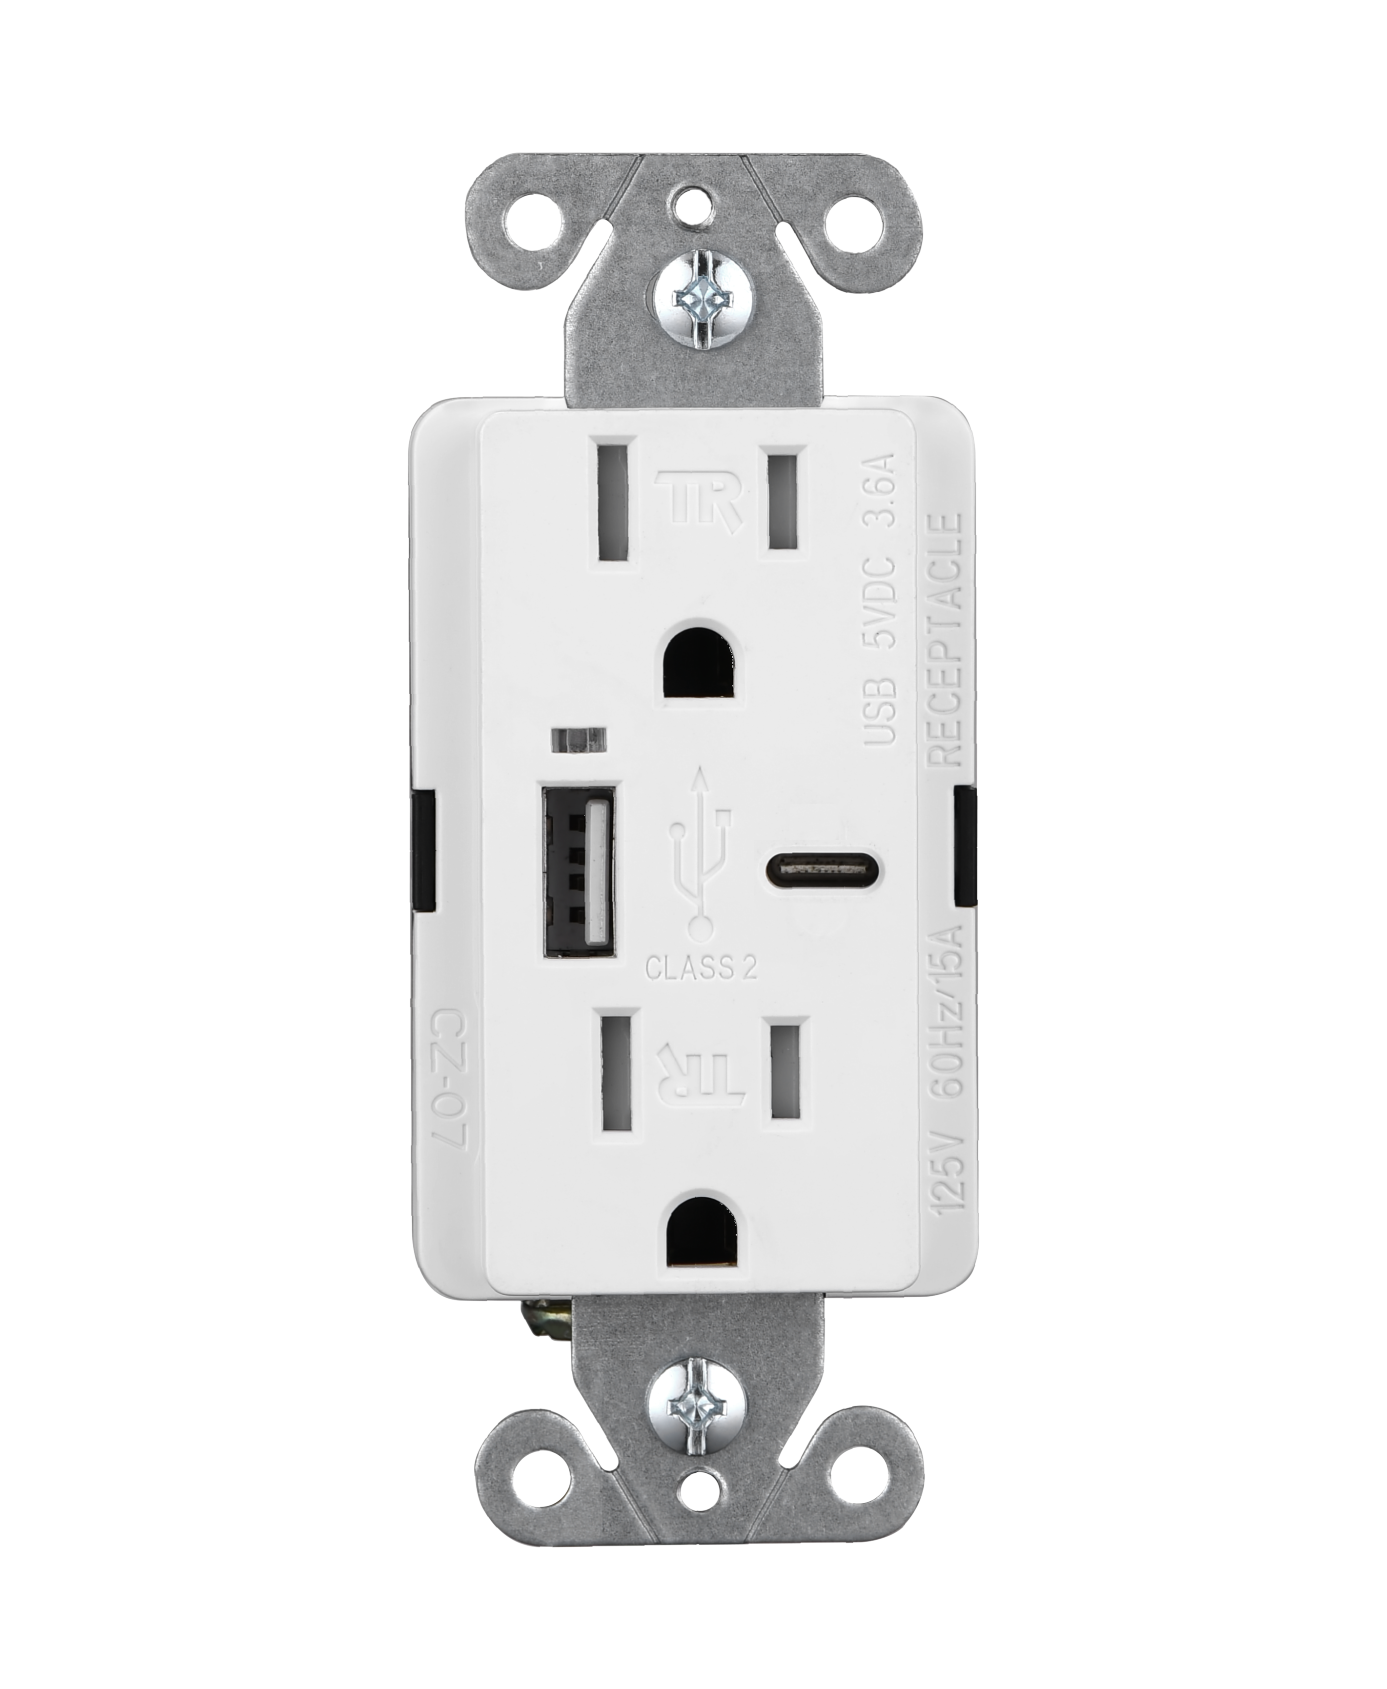 Low price for Residential Outlets - USB Wall Outlets CZ-07 – Faith Electric